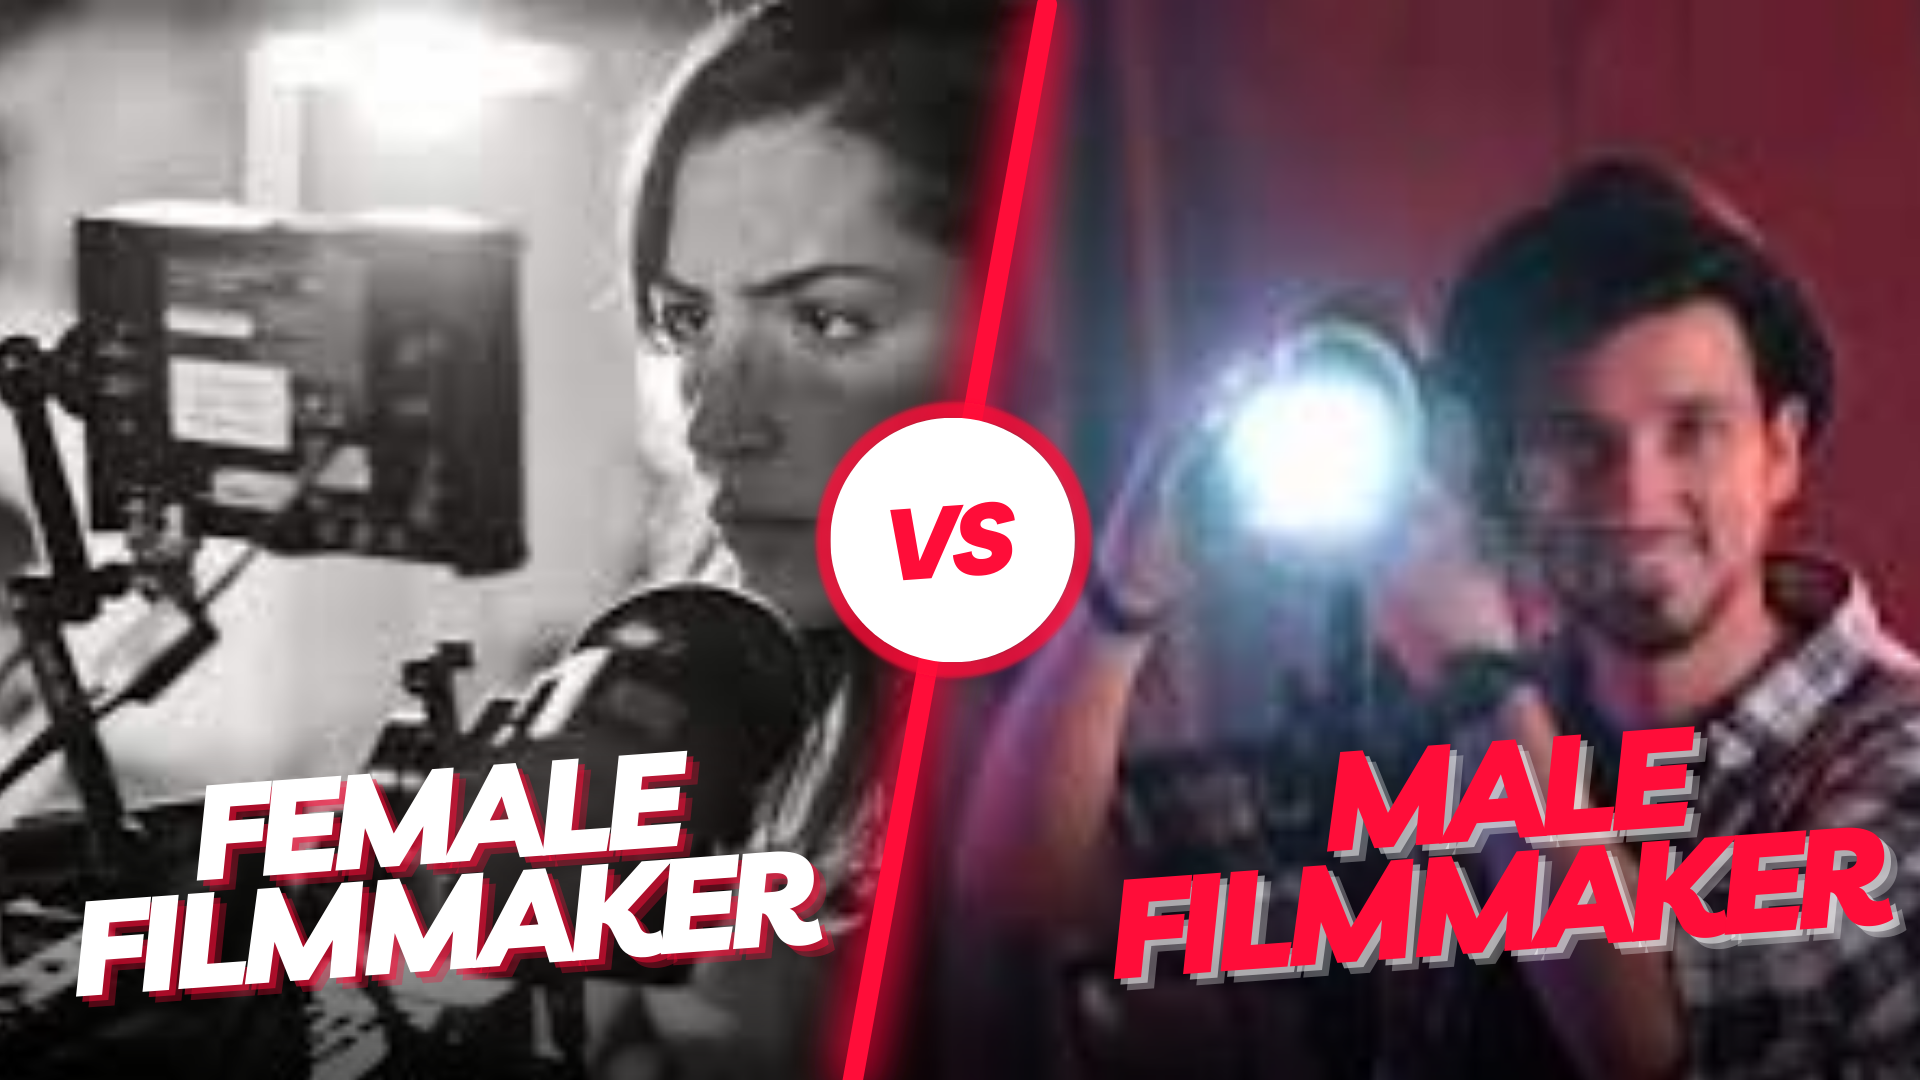 WHICH IS MORE POPULAR– MALE-LED OR FEMALE-LED FILMS?